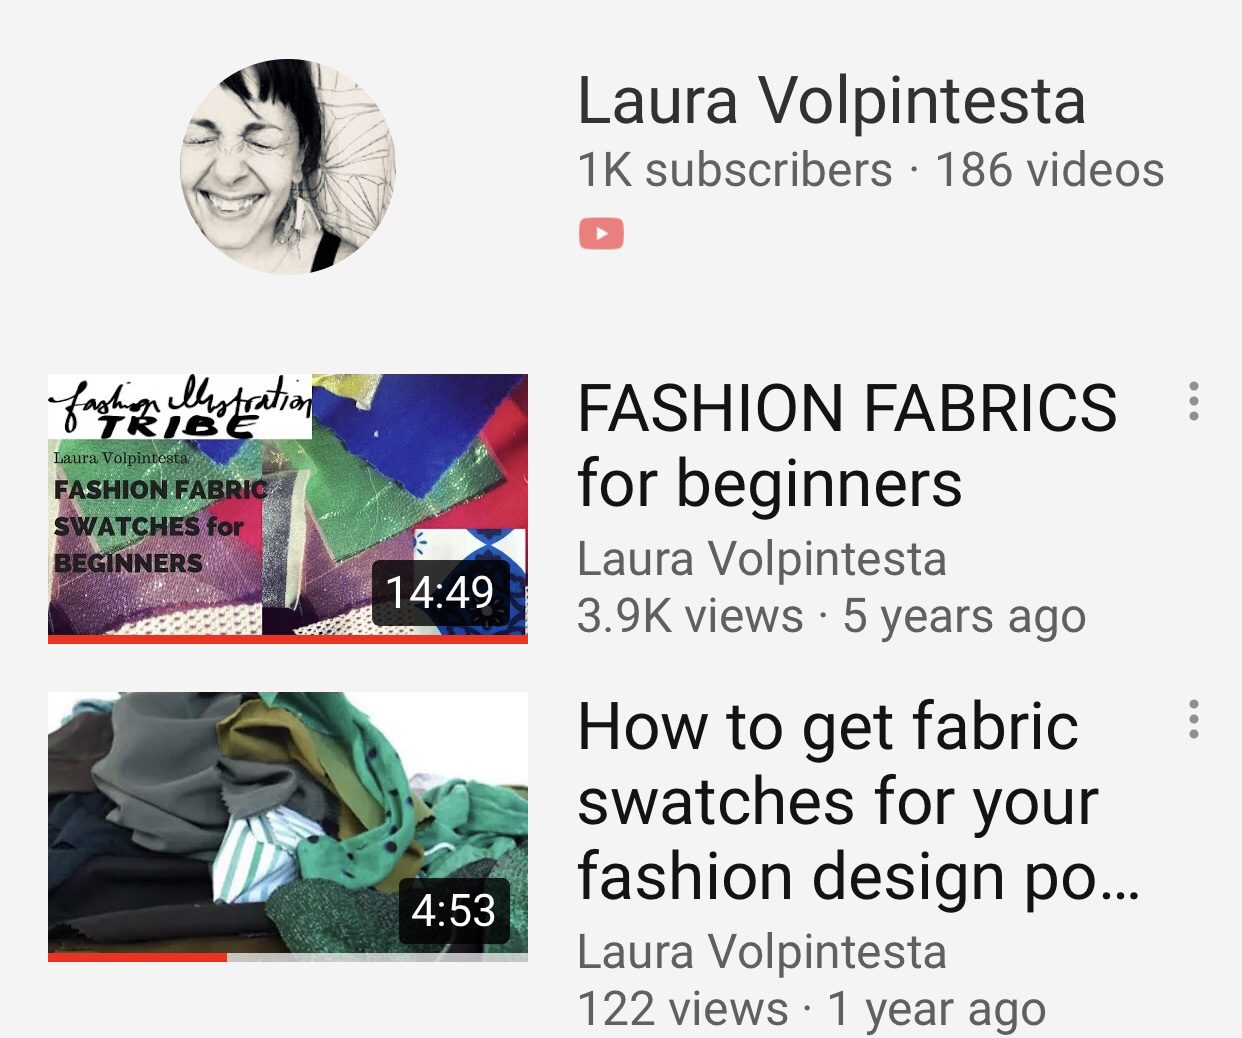 Laura Volpintesta's videos about fashion fabrics and fabric swatches for fashion designers and students